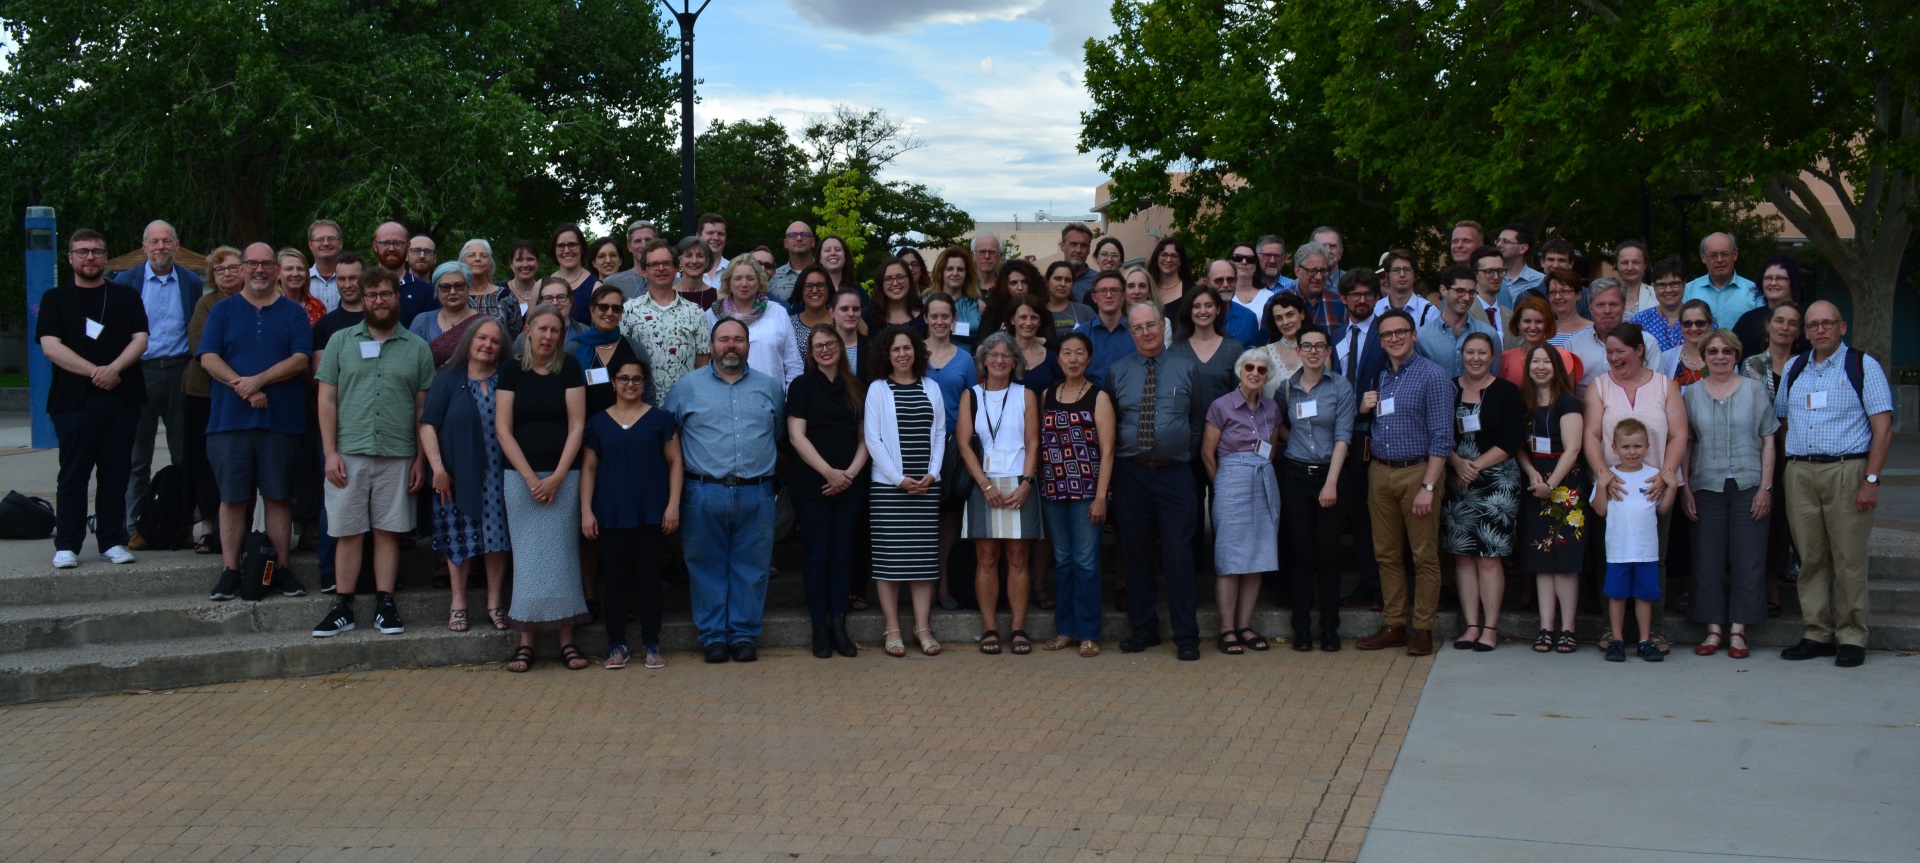 Group photo of the 2019 ISAS conference participants